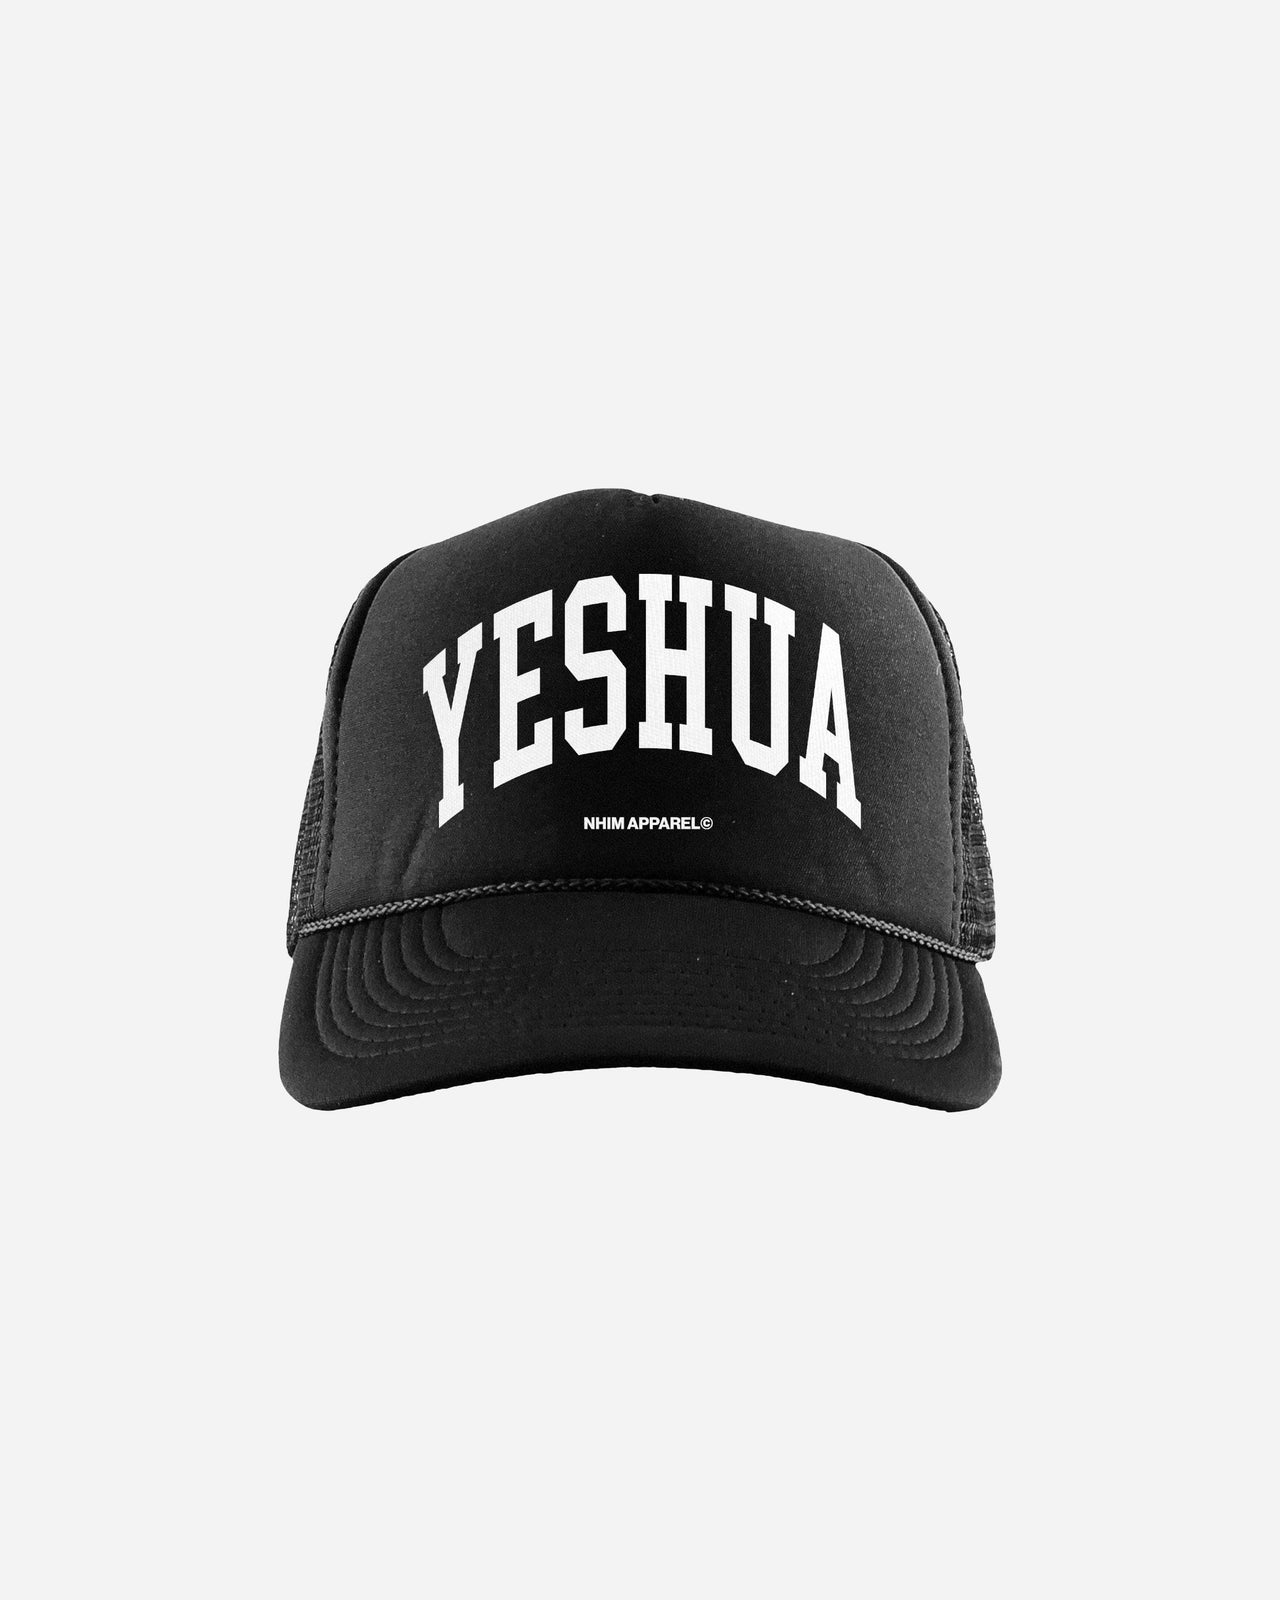 YESHUA Christian trucker hat from NHIM Apparel Christian Clothing Brand, black hat with white writing